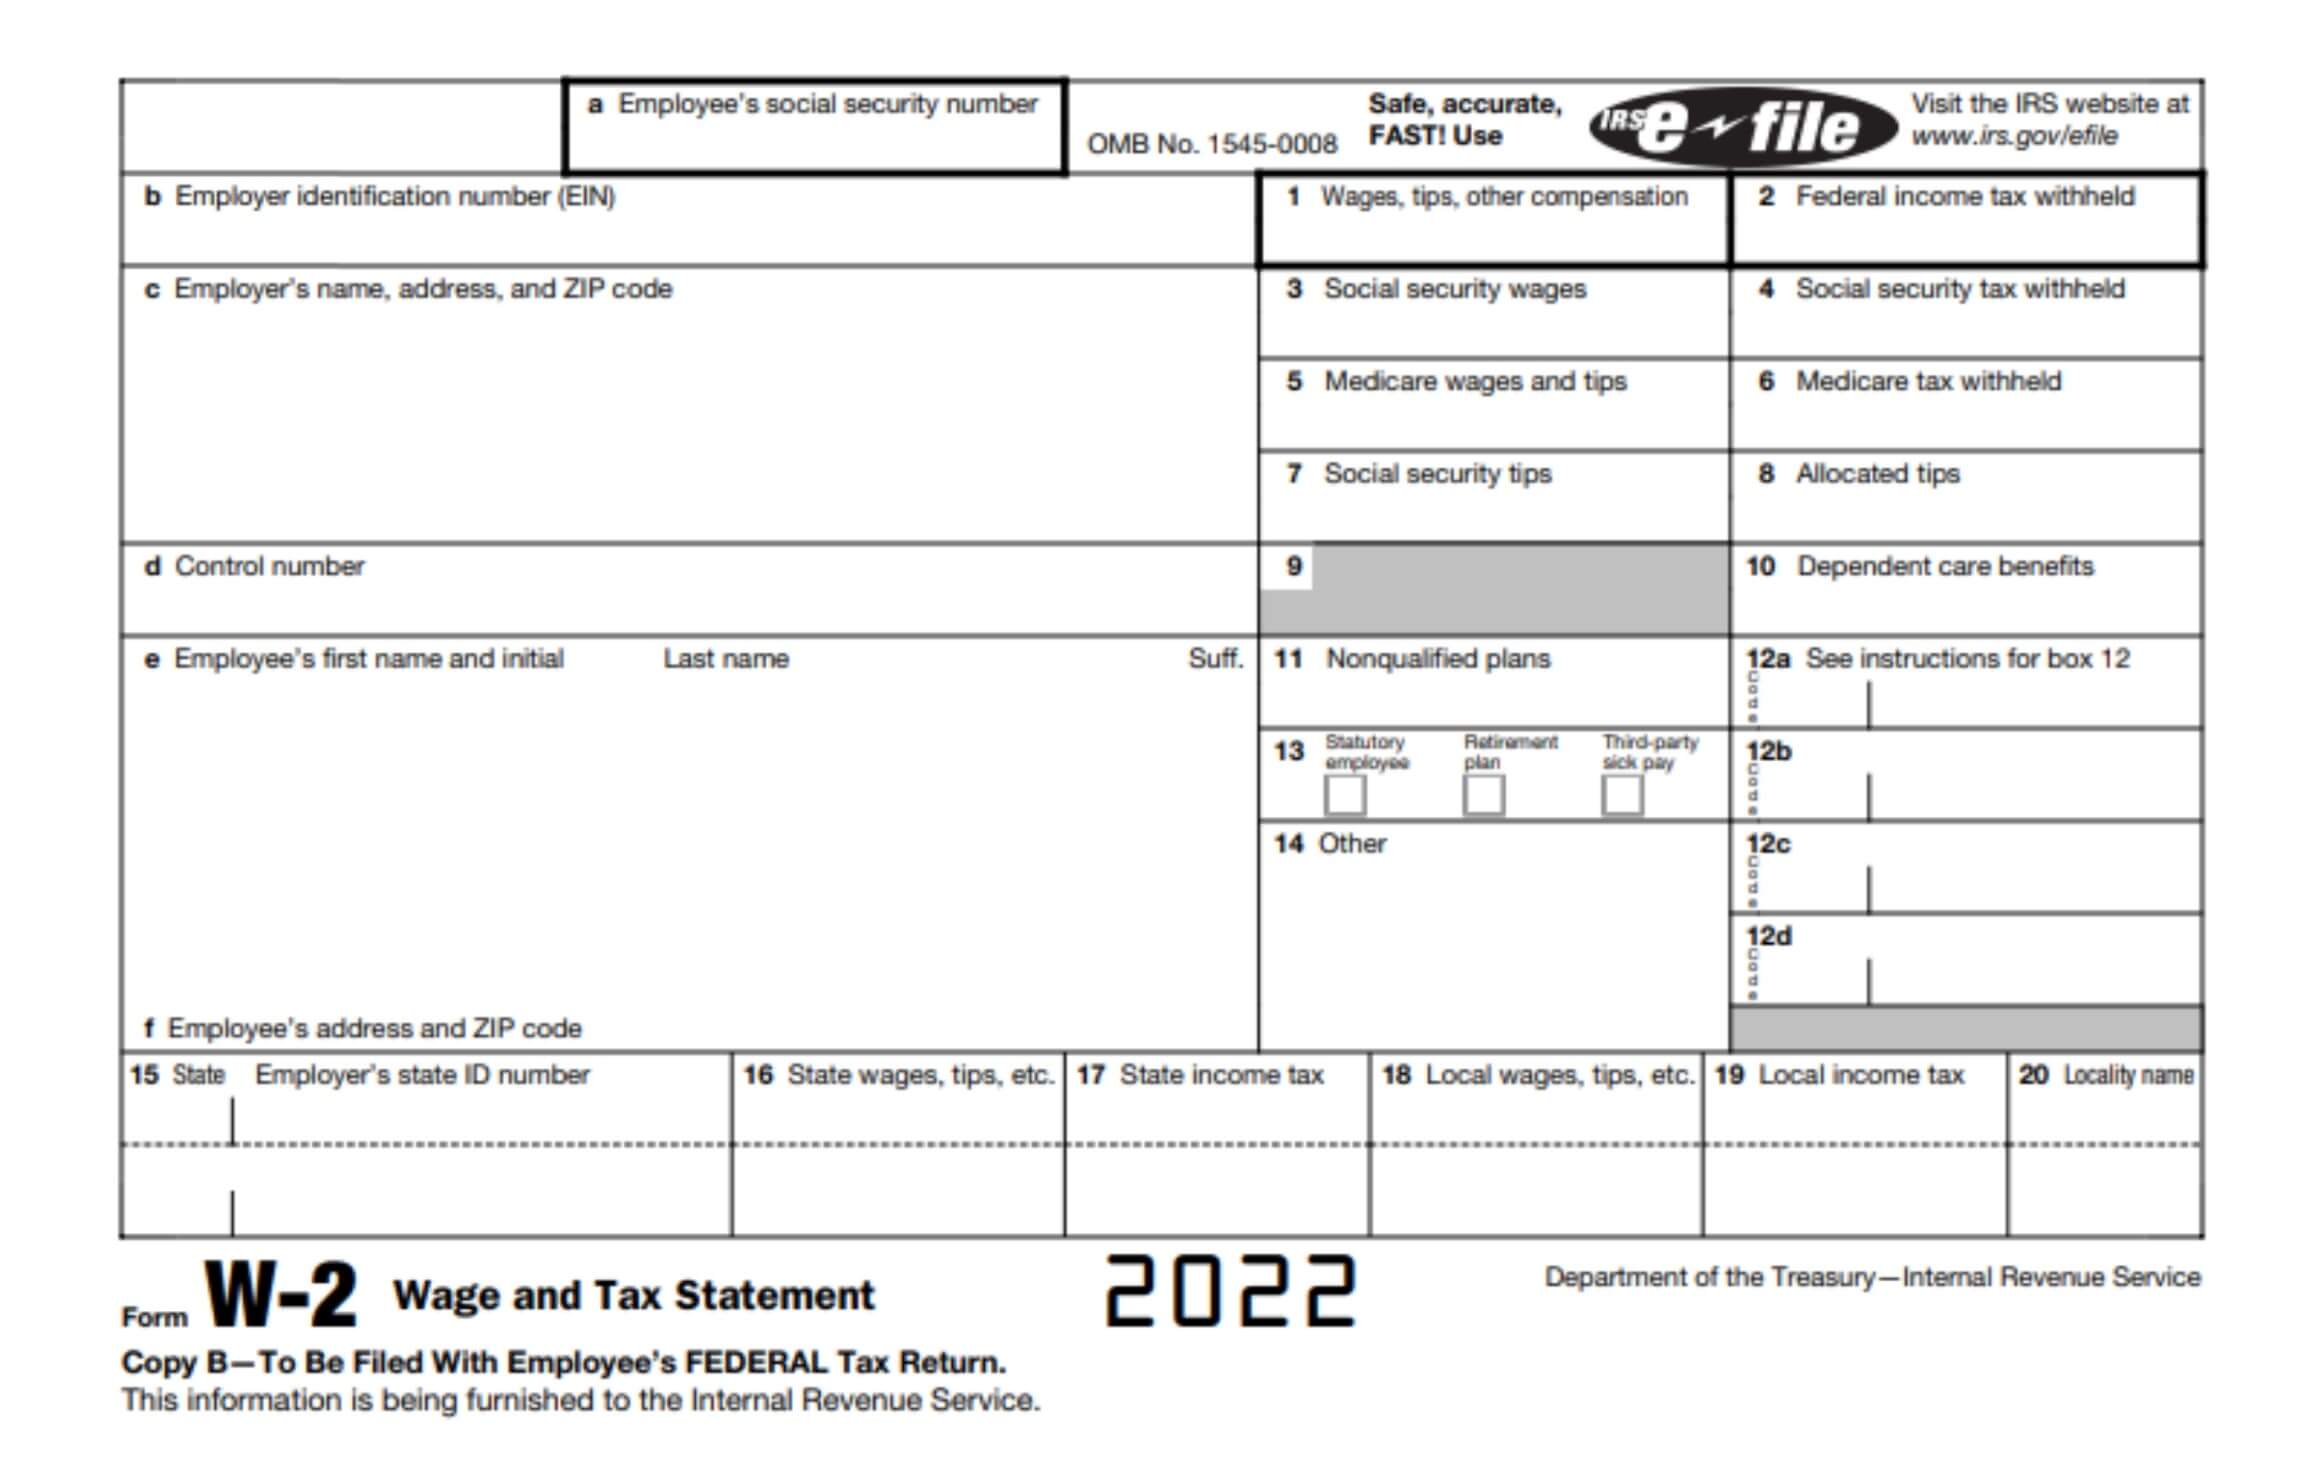 irs form w-2 example